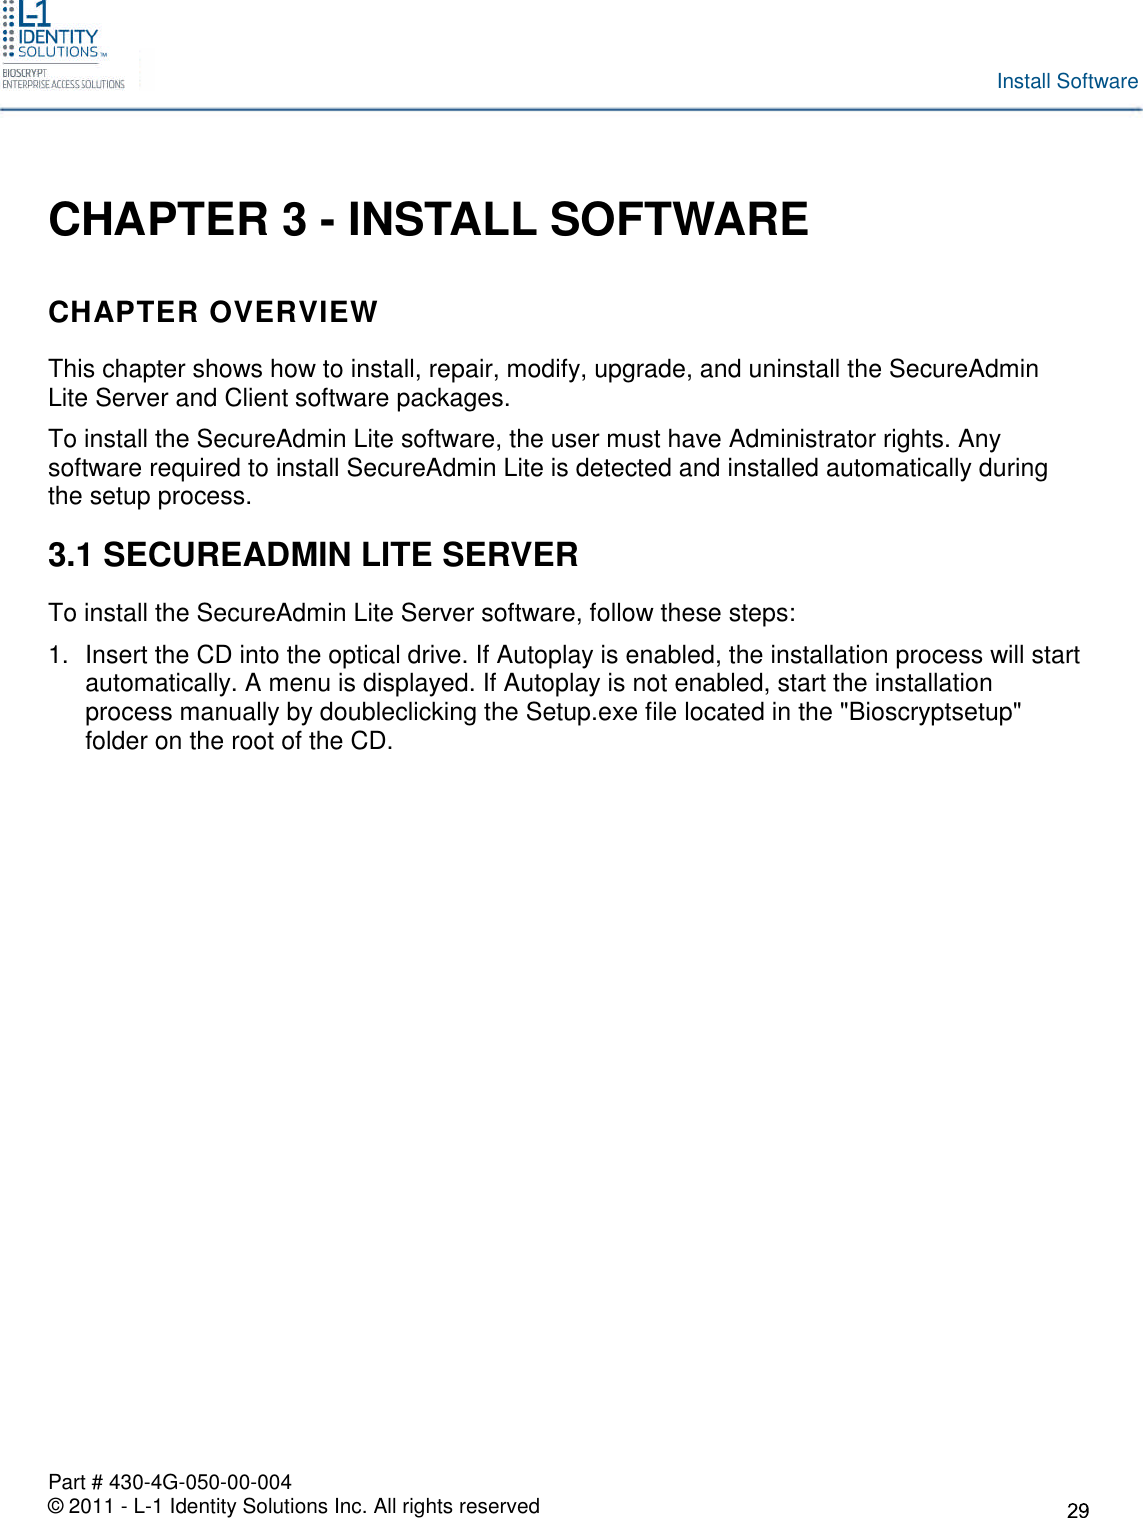 Part # 430-4G-050-00-004© 2011 - L-1 Identity Solutions Inc. All rights reservedInstall SoftwareCHAPTER 3 - INSTALL SOFTWARECHAPTER OVERVIEWThis chapter shows how to install, repair, modify, upgrade, and uninstall the SecureAdminLite Server and Client software packages.To install the SecureAdmin Lite software, the user must have Administrator rights. Anysoftware required to install SecureAdmin Lite is detected and installed automatically duringthe setup process.3.1 SECUREADMIN LITE SERVERTo install the SecureAdmin Lite Server software, follow these steps:1. Insert the CD into the optical drive. If Autoplay is enabled, the installation process will startautomatically. A menu is displayed. If Autoplay is not enabled, start the installationprocess manually by doubleclicking the Setup.exe file located in the &quot;Bioscryptsetup&quot;folder on the root of the CD.